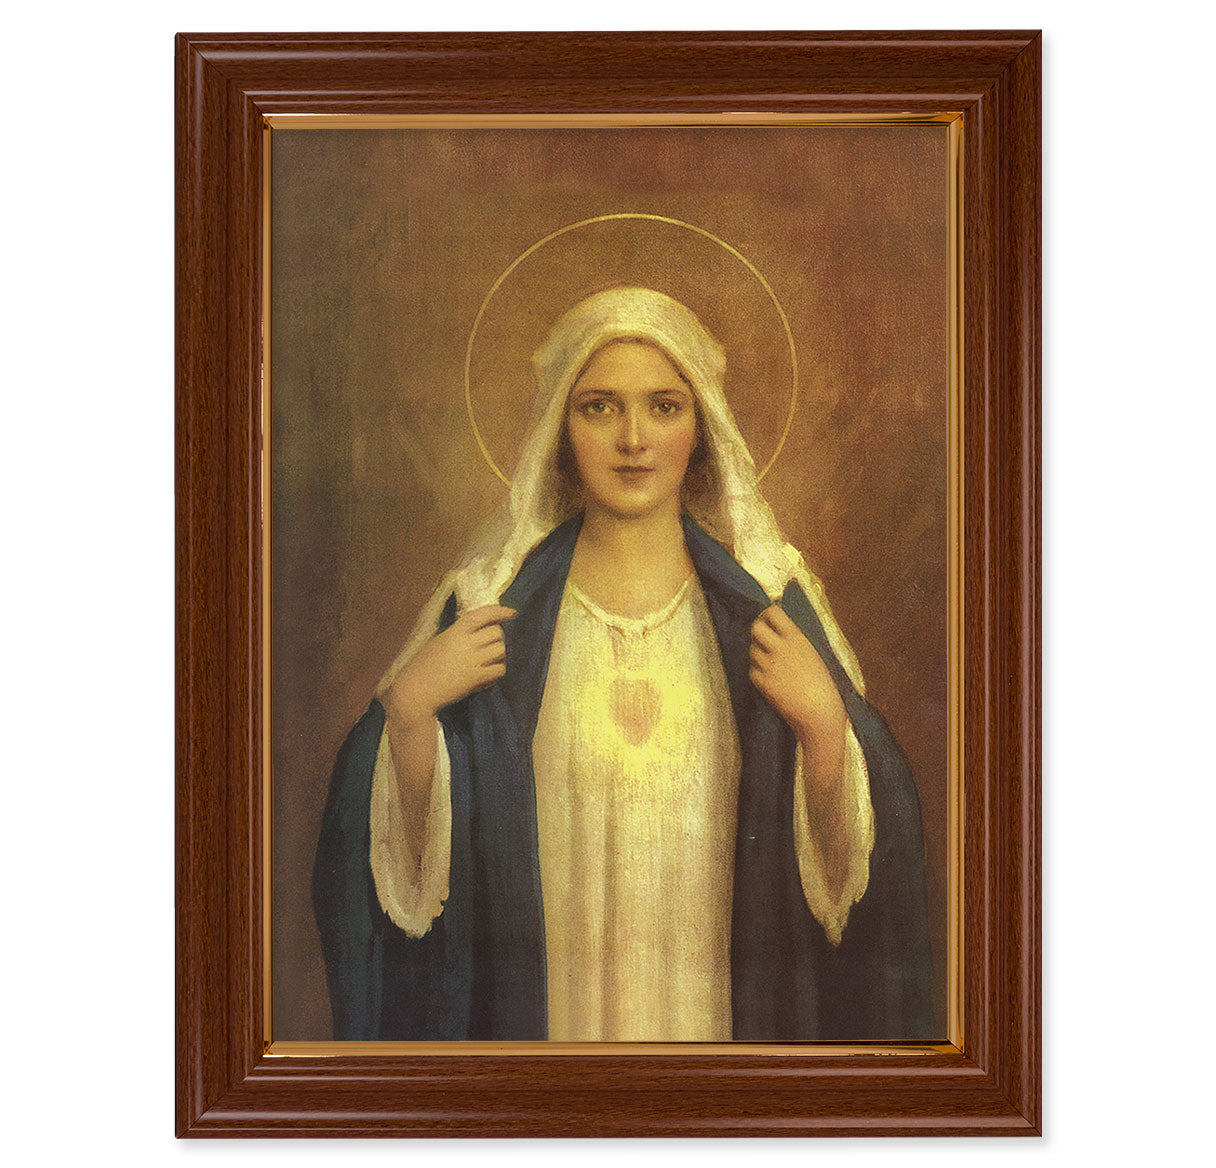 Immaculate Heart of Mary Picture Framed Wall Art Decor, Large, Traditional Dark Walnut Finished Frame with Thin Gold Lip